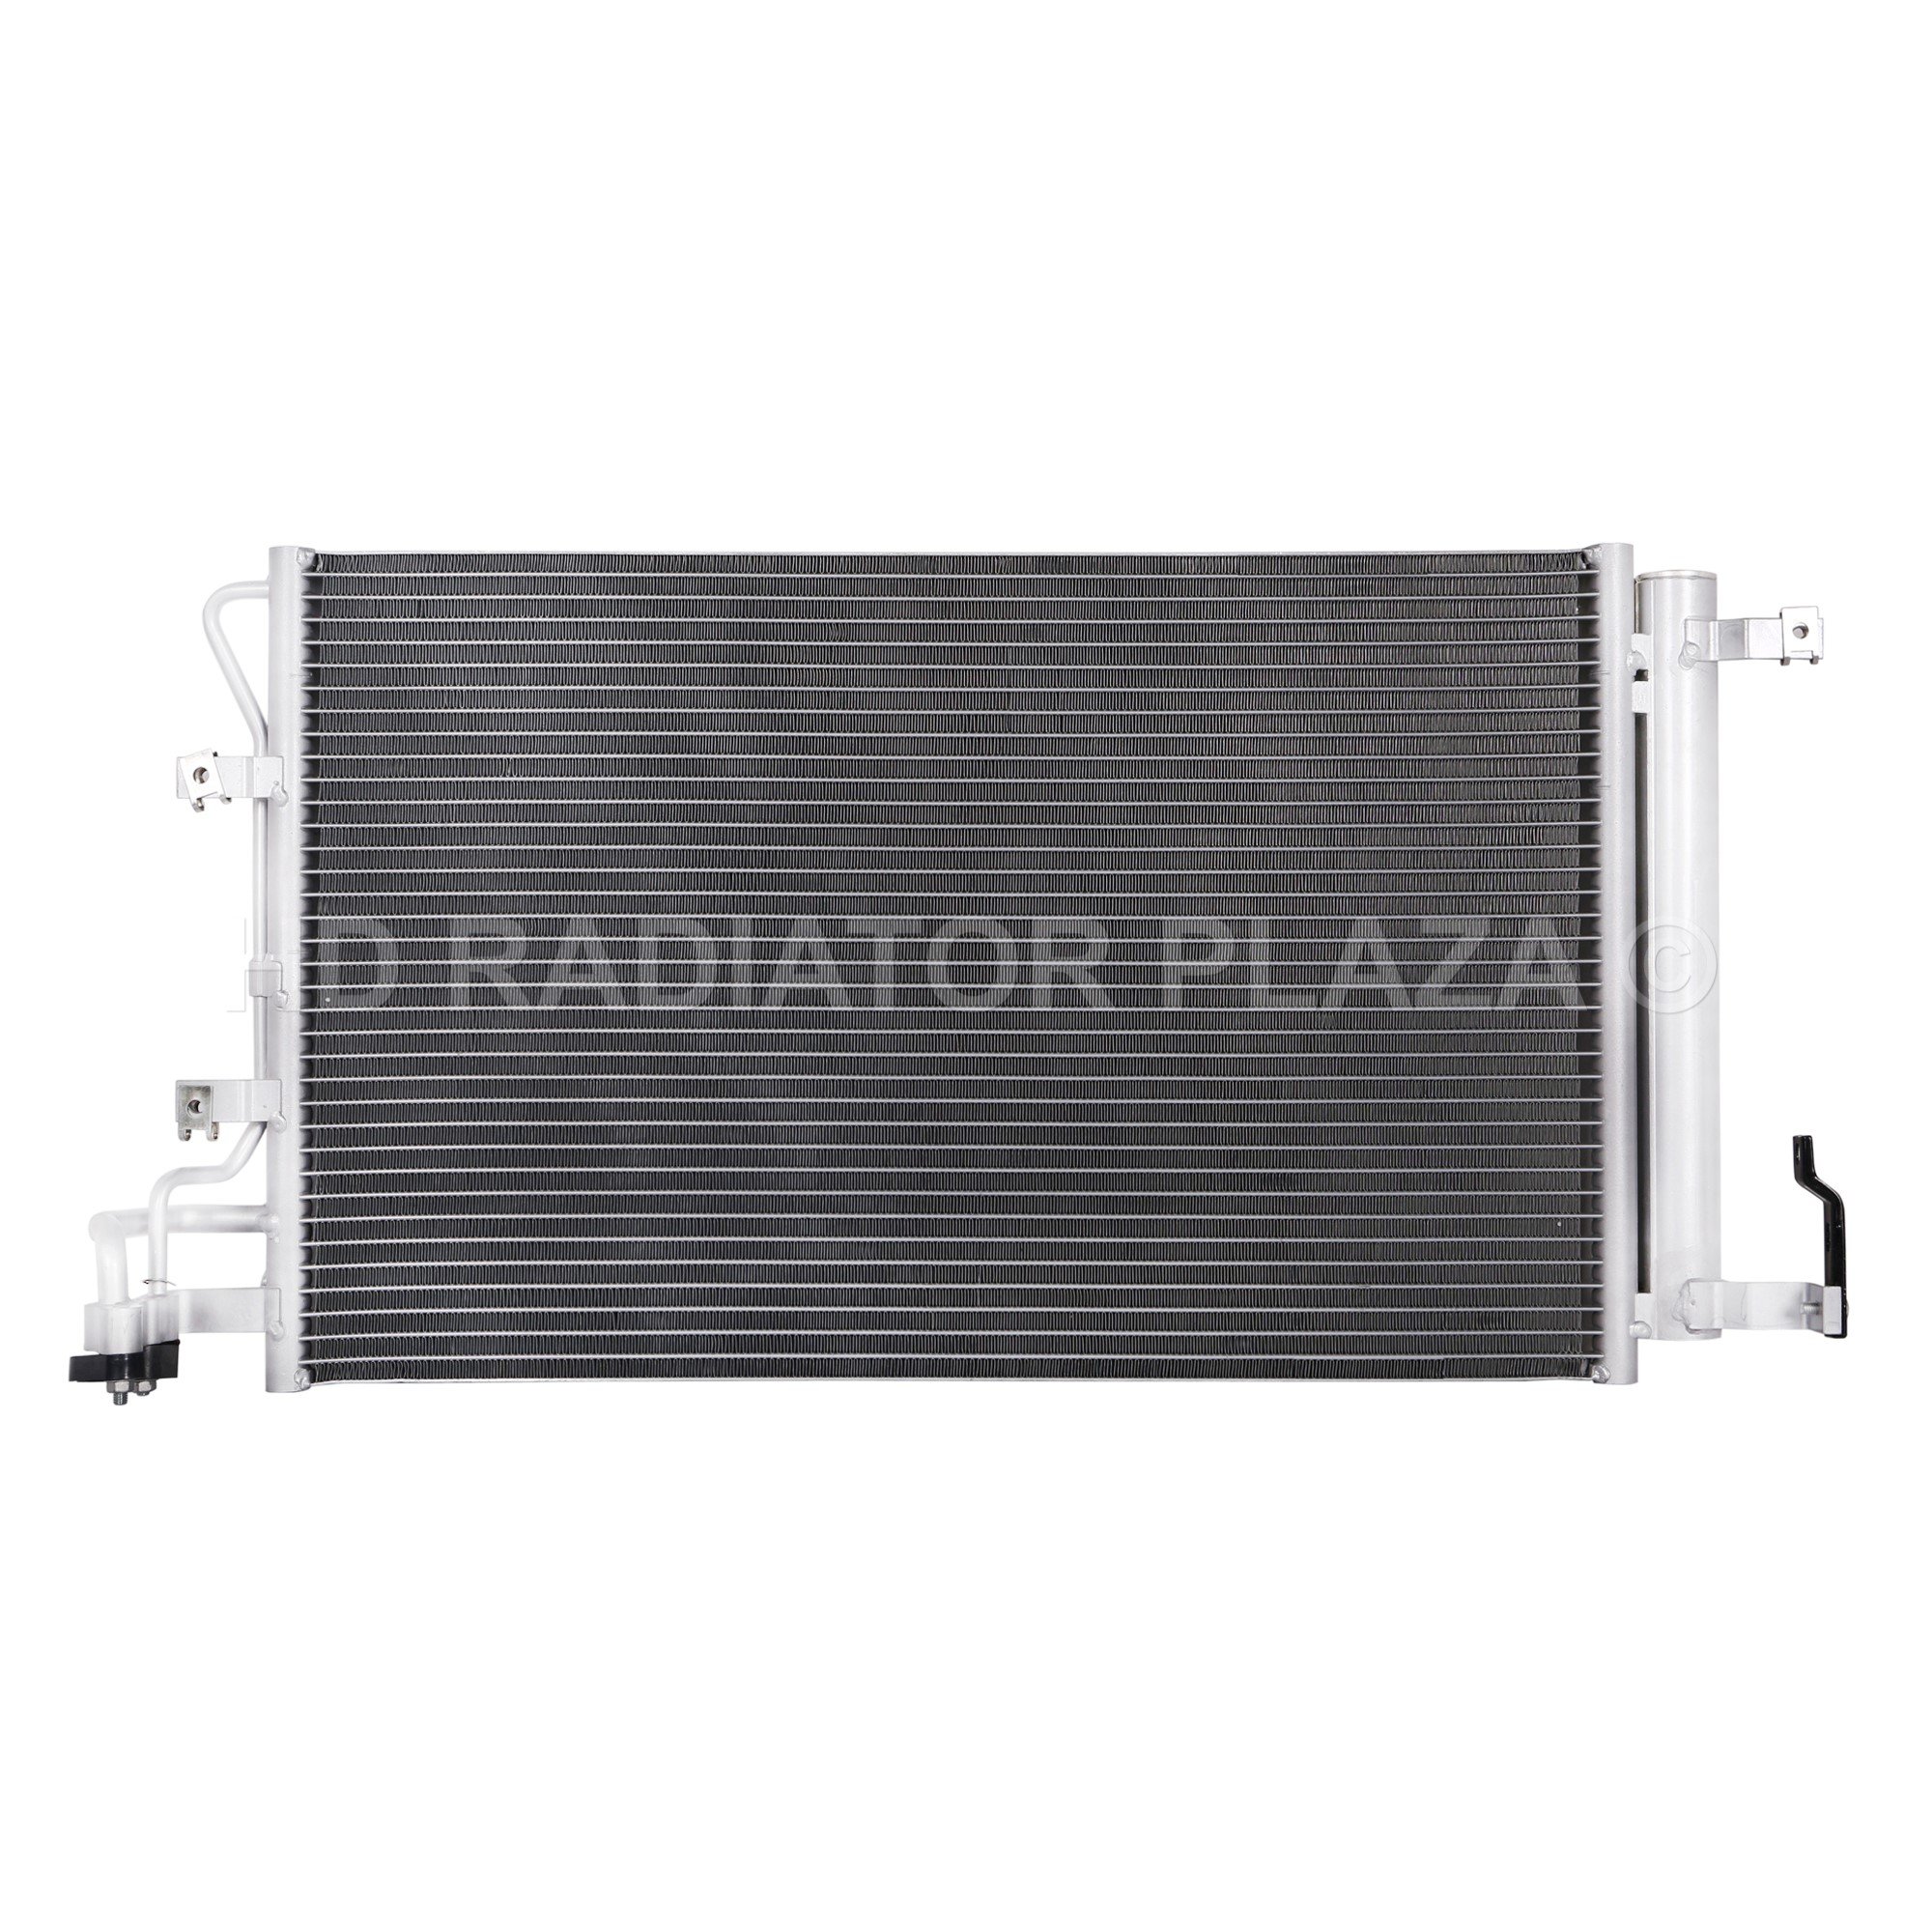 AC3697 -  AC Condensers   - SUPERSEDED TO AC3347